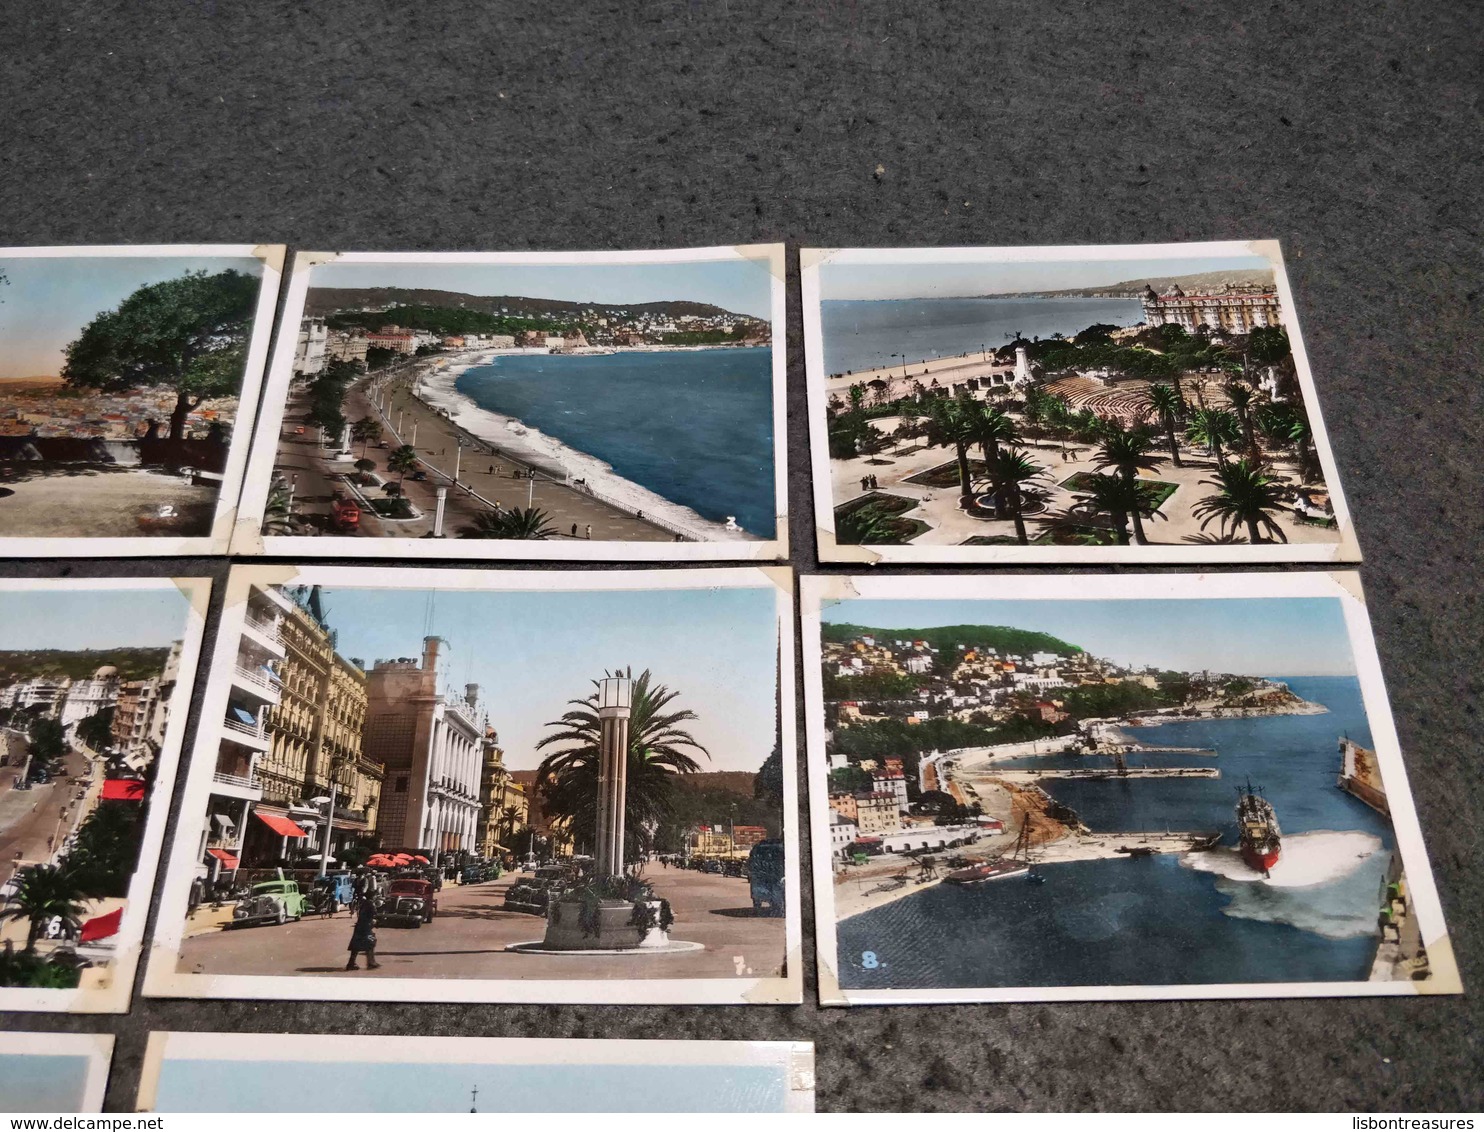 ANTIQUE LOT X 10 SMALL COLOR PHOTOS FRANCE - NICE VIEWS - 35mm -16mm - 9,5+8+S8mm Film Rolls